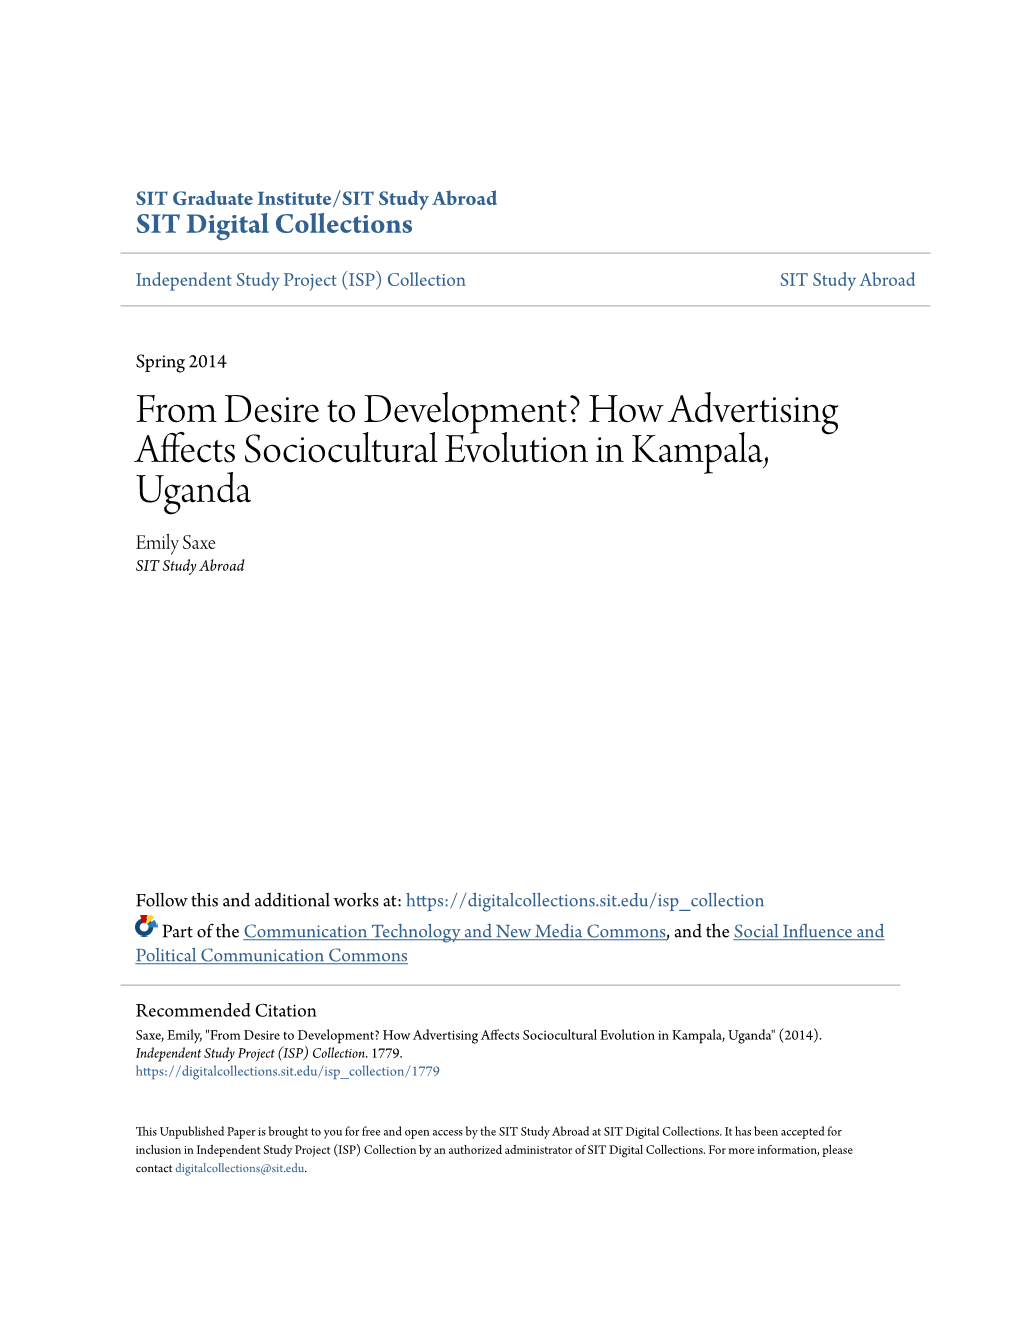 How Advertising Affects Sociocultural Evolution in Kampala, Uganda Emily Saxe SIT Study Abroad